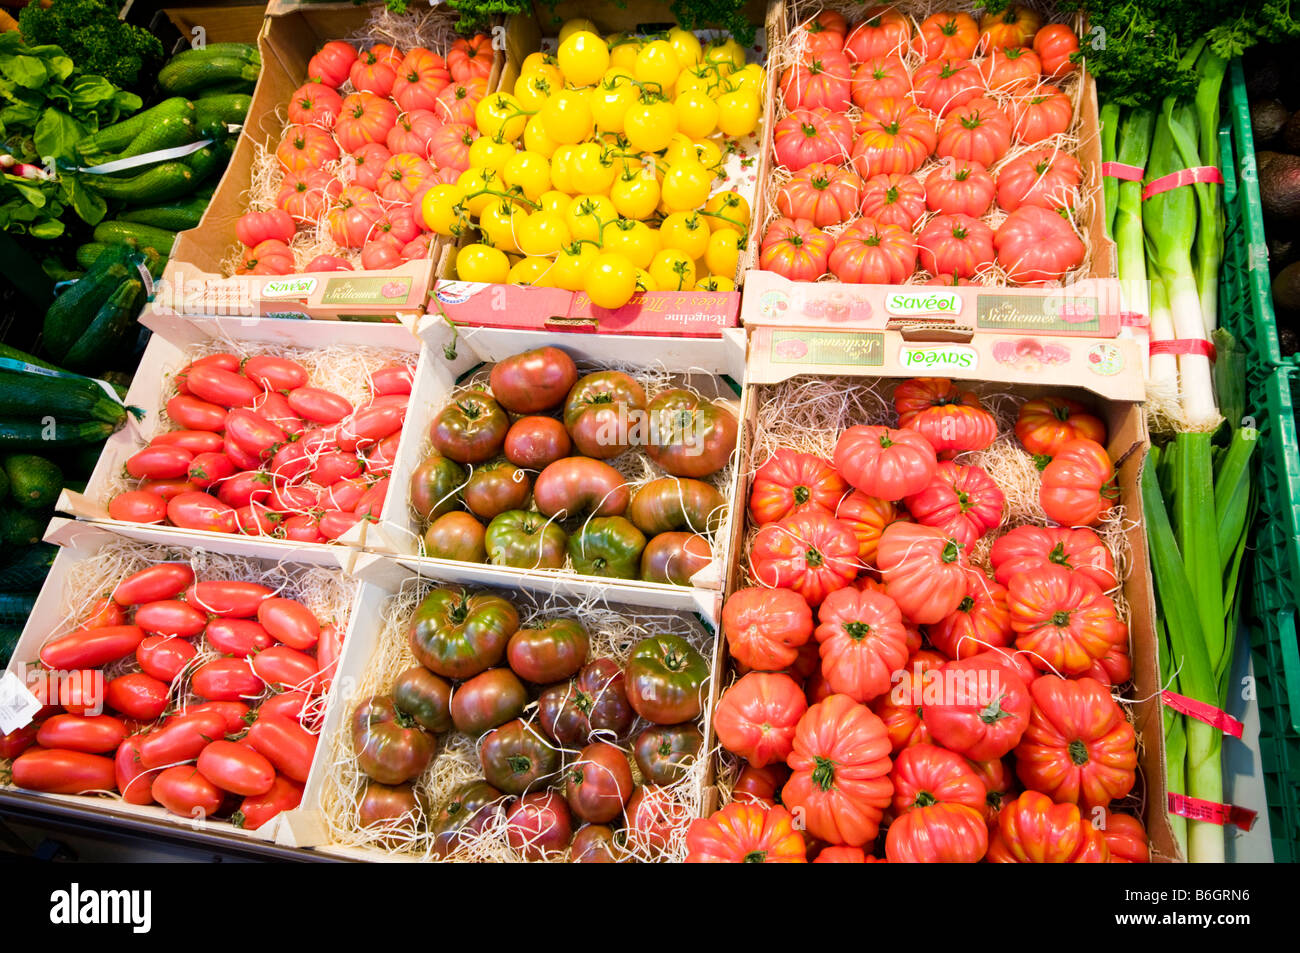 Display of various types of unusual tomatos in French Supermarket Stock Photo